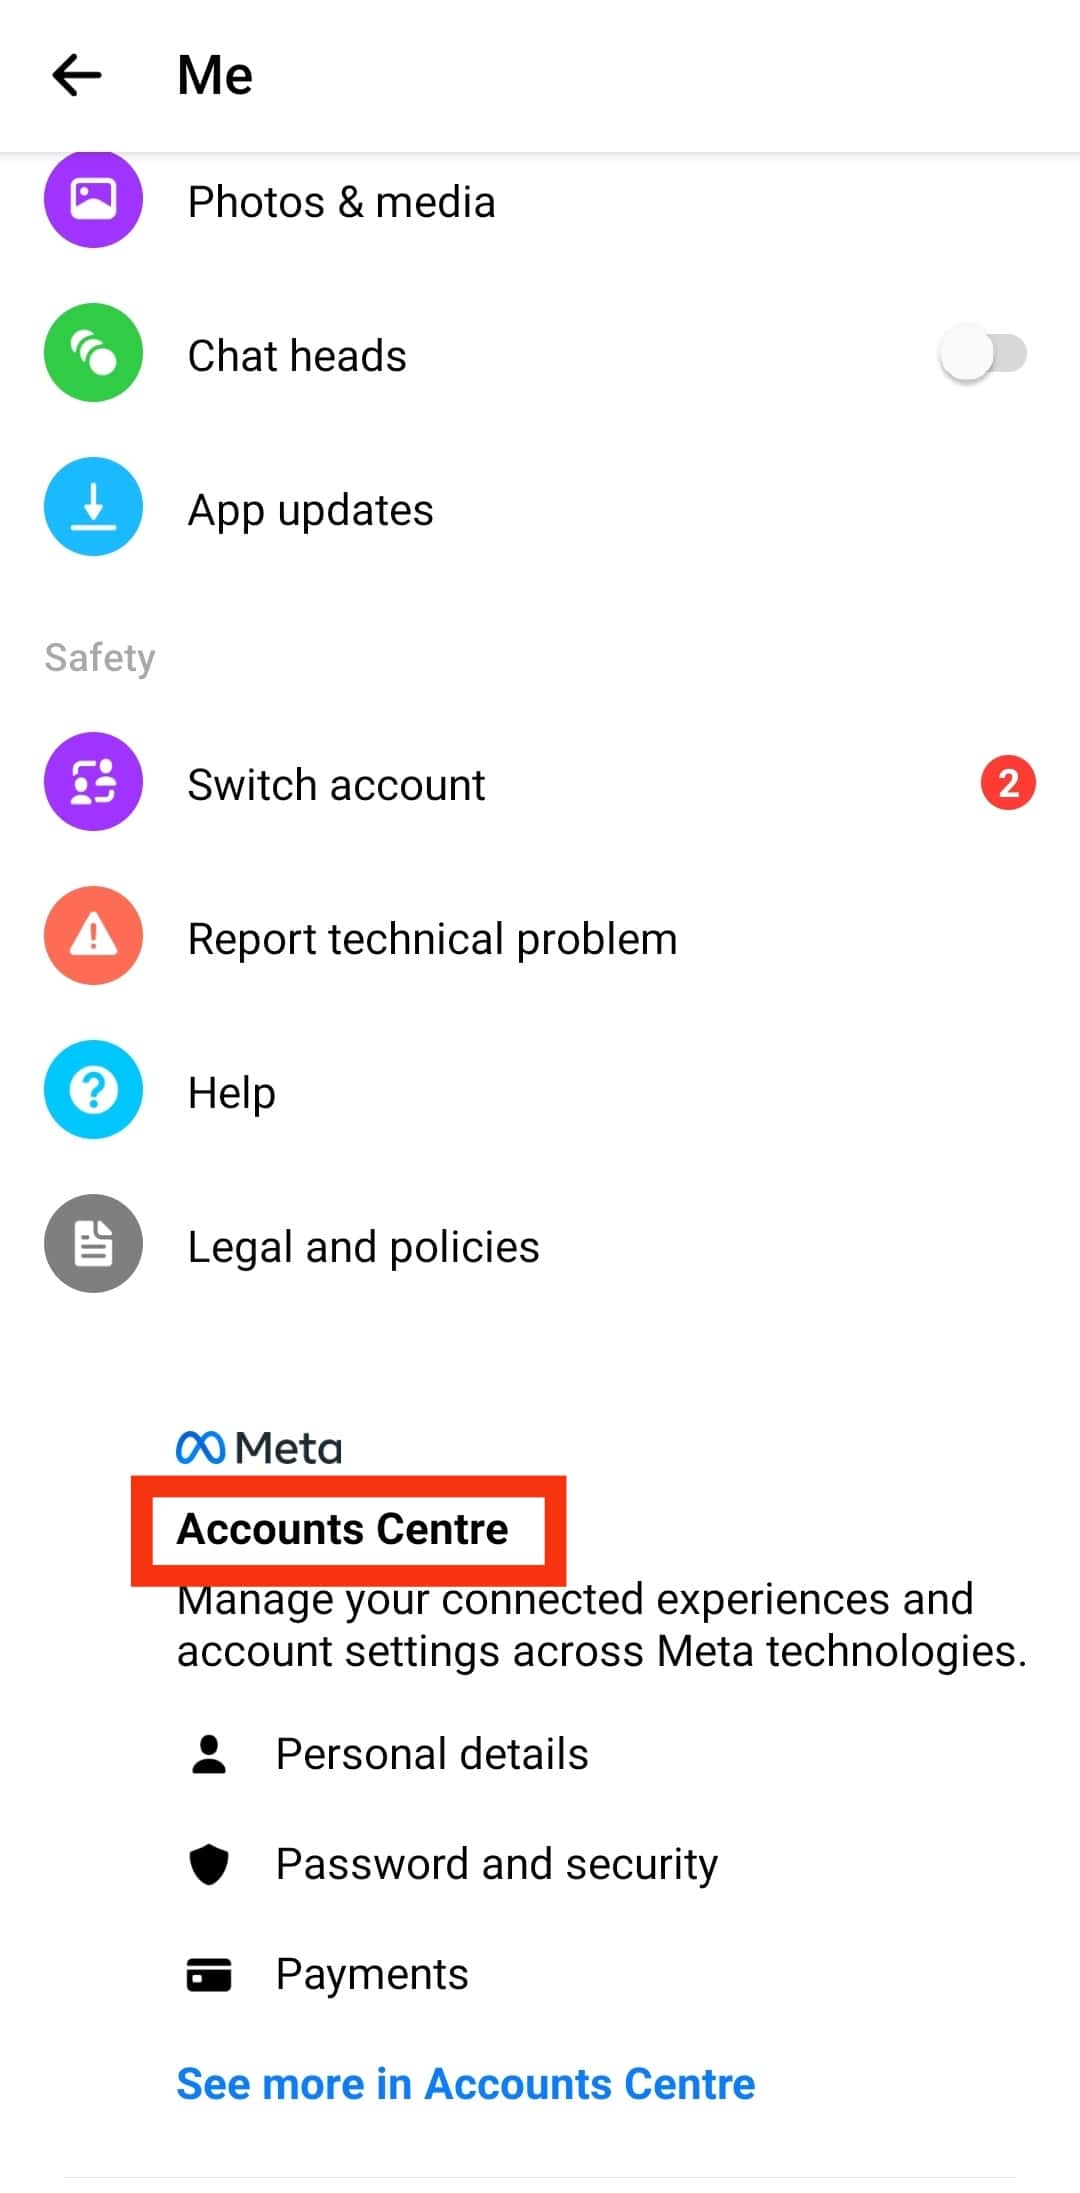 Scroll Down To The Accounts Centre Section